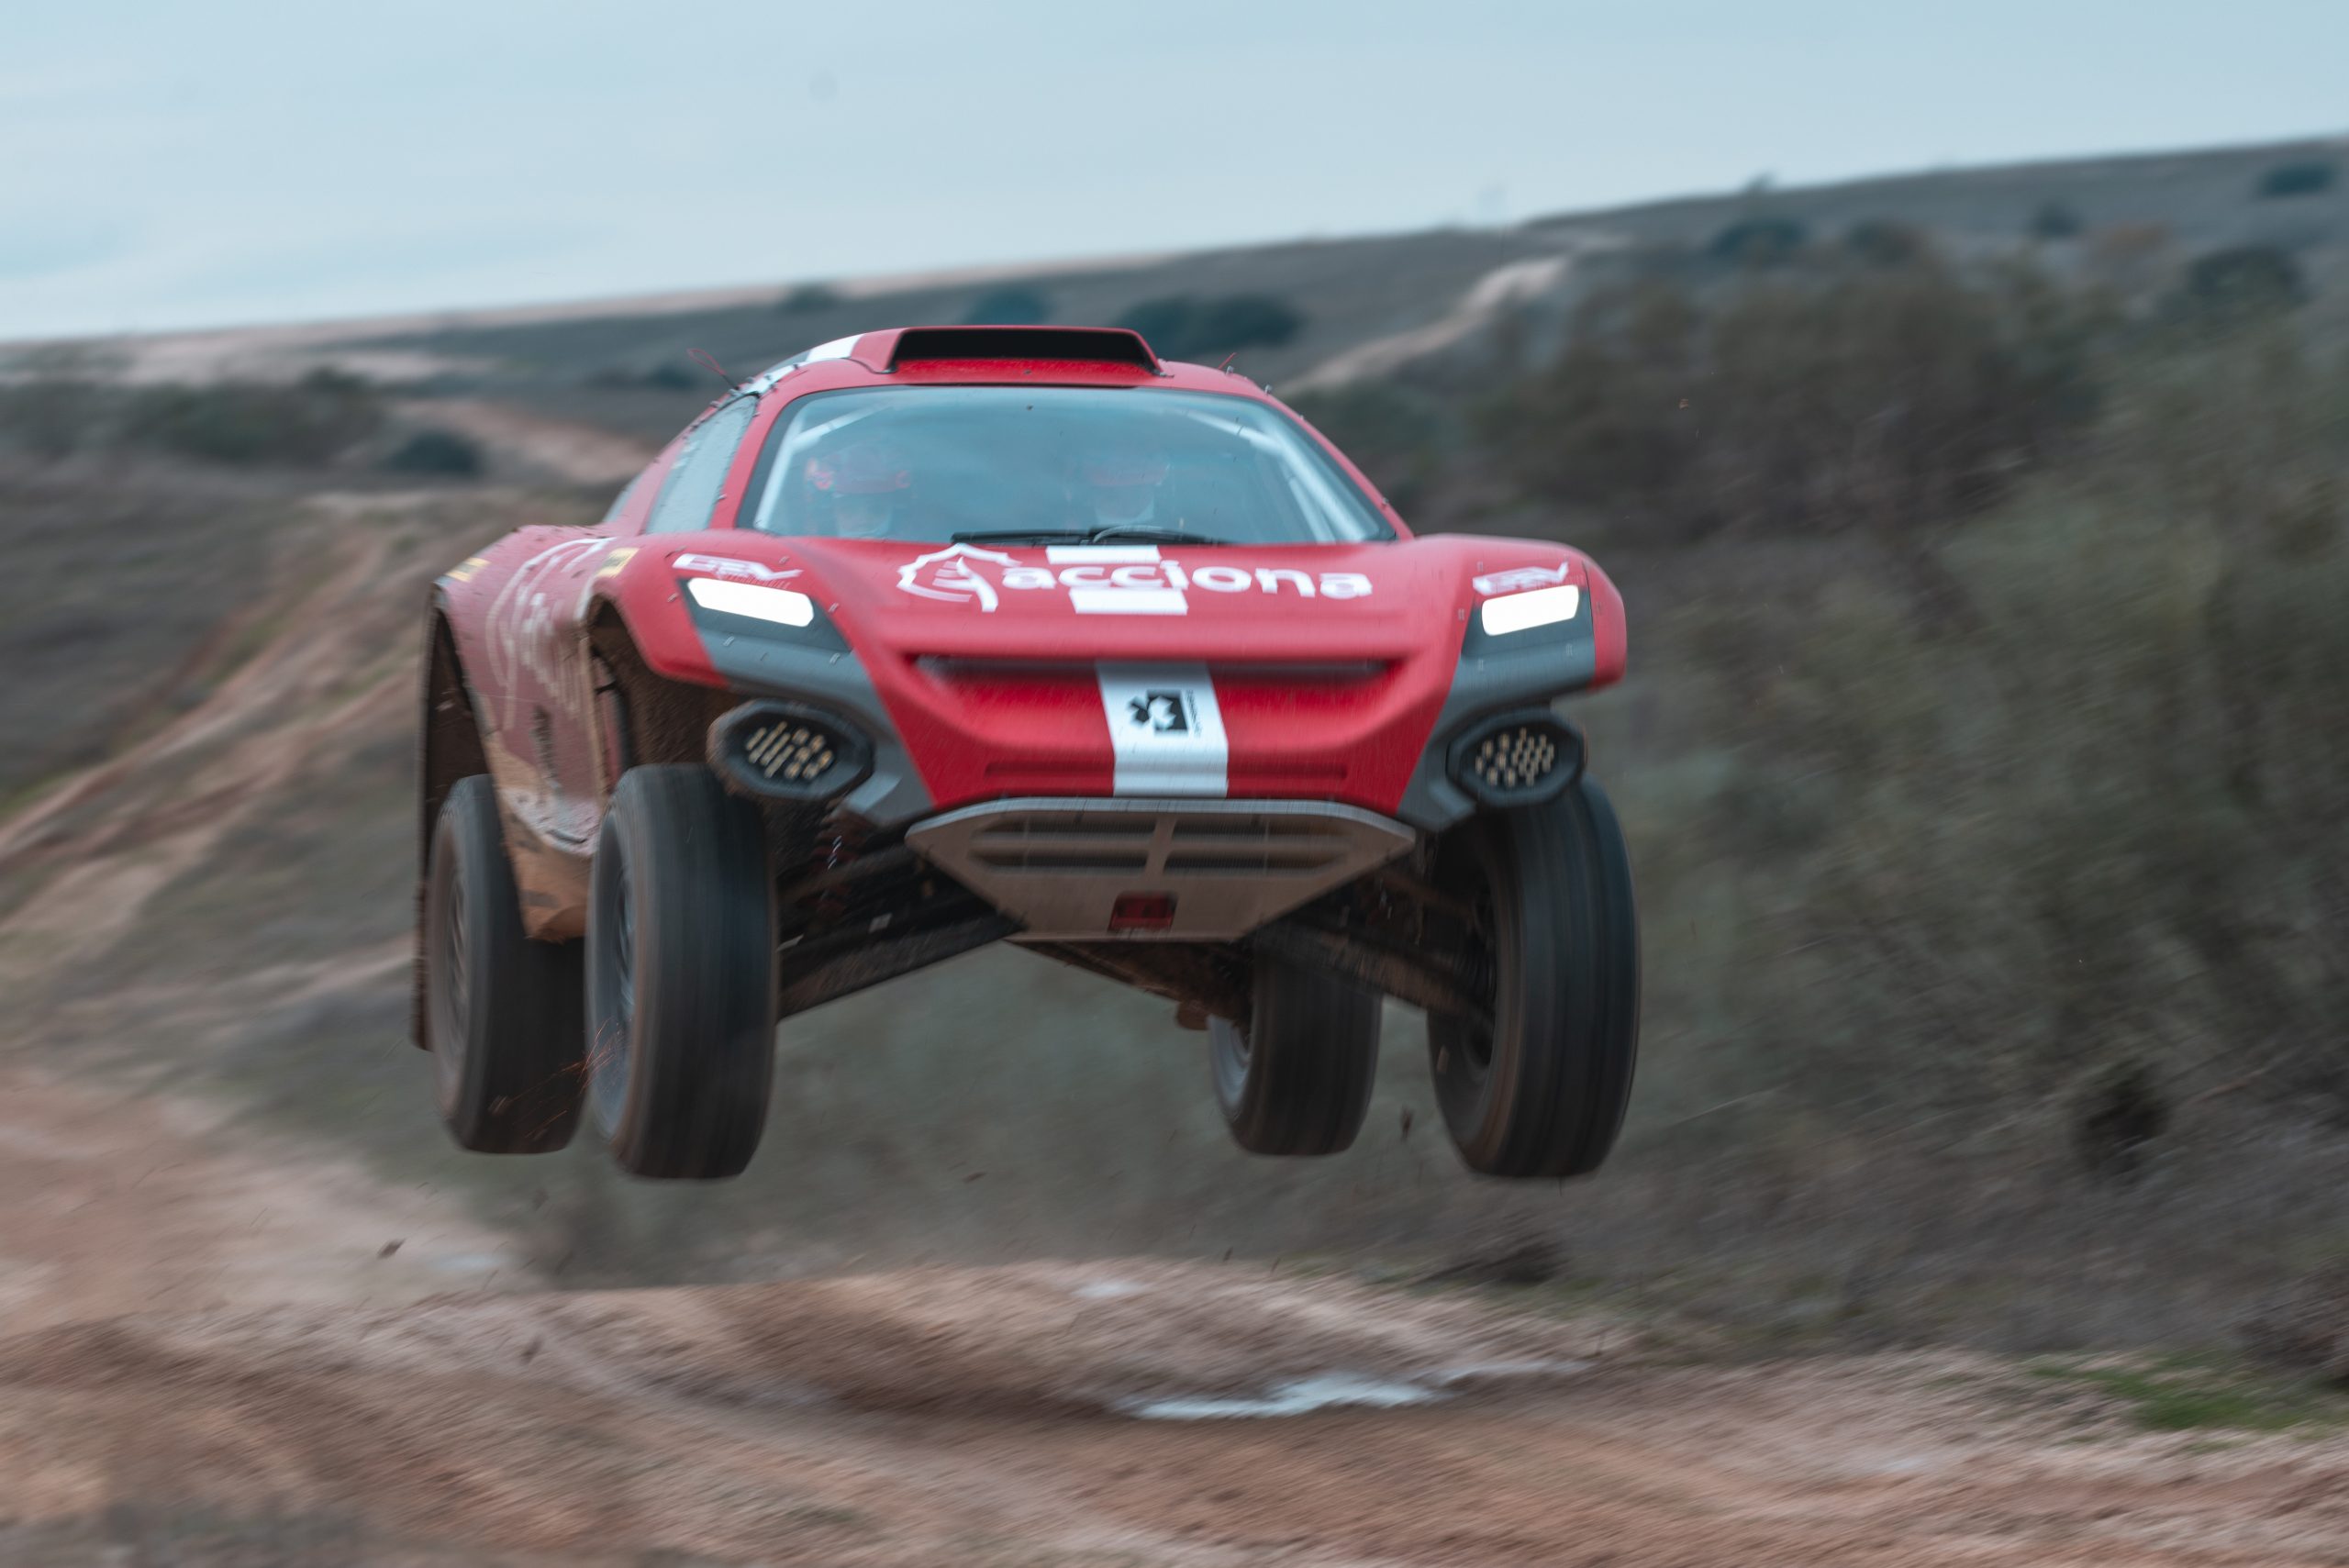 ACCIONA, CARLOS SAINZ AND QEV TECHNOLOGIES TEAM UP TO COMPETE IN EXTREME E, THE NEW SUSTAINABLE OFF-ROAD SUV CHAMPIONSHIP, QEV